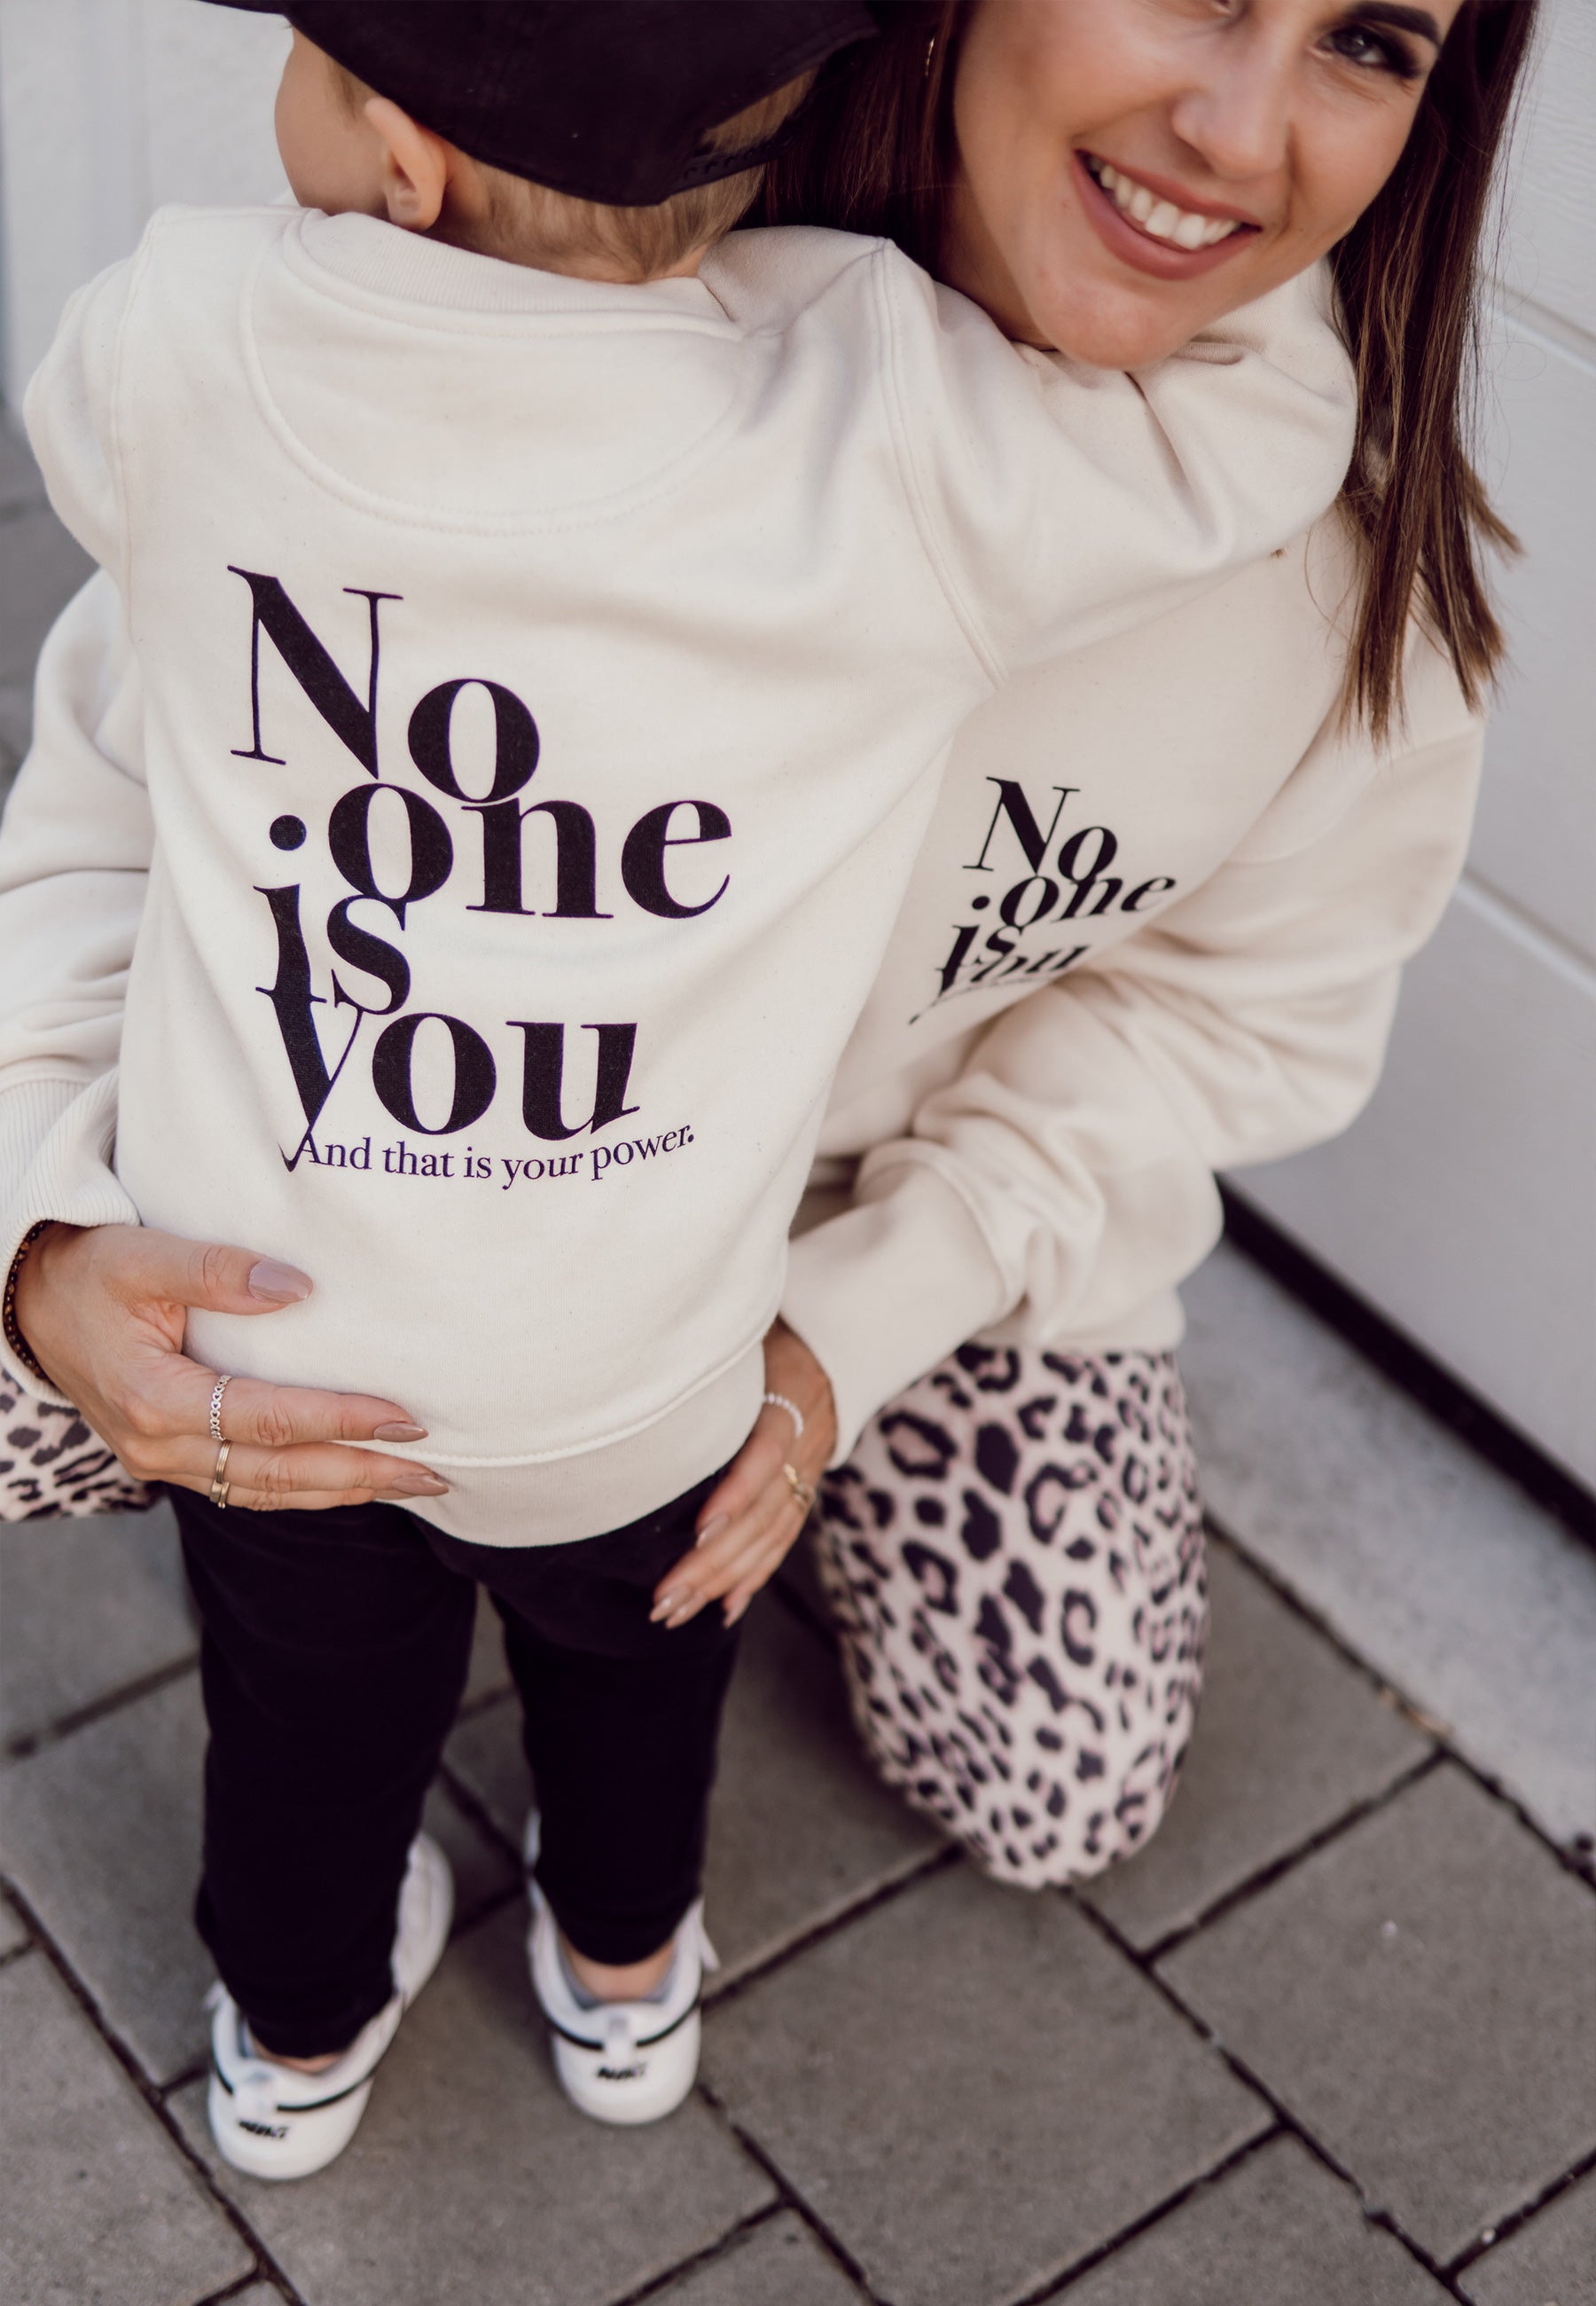 NO ONE IS YOU Baby/Kids Sweater Natural Raw